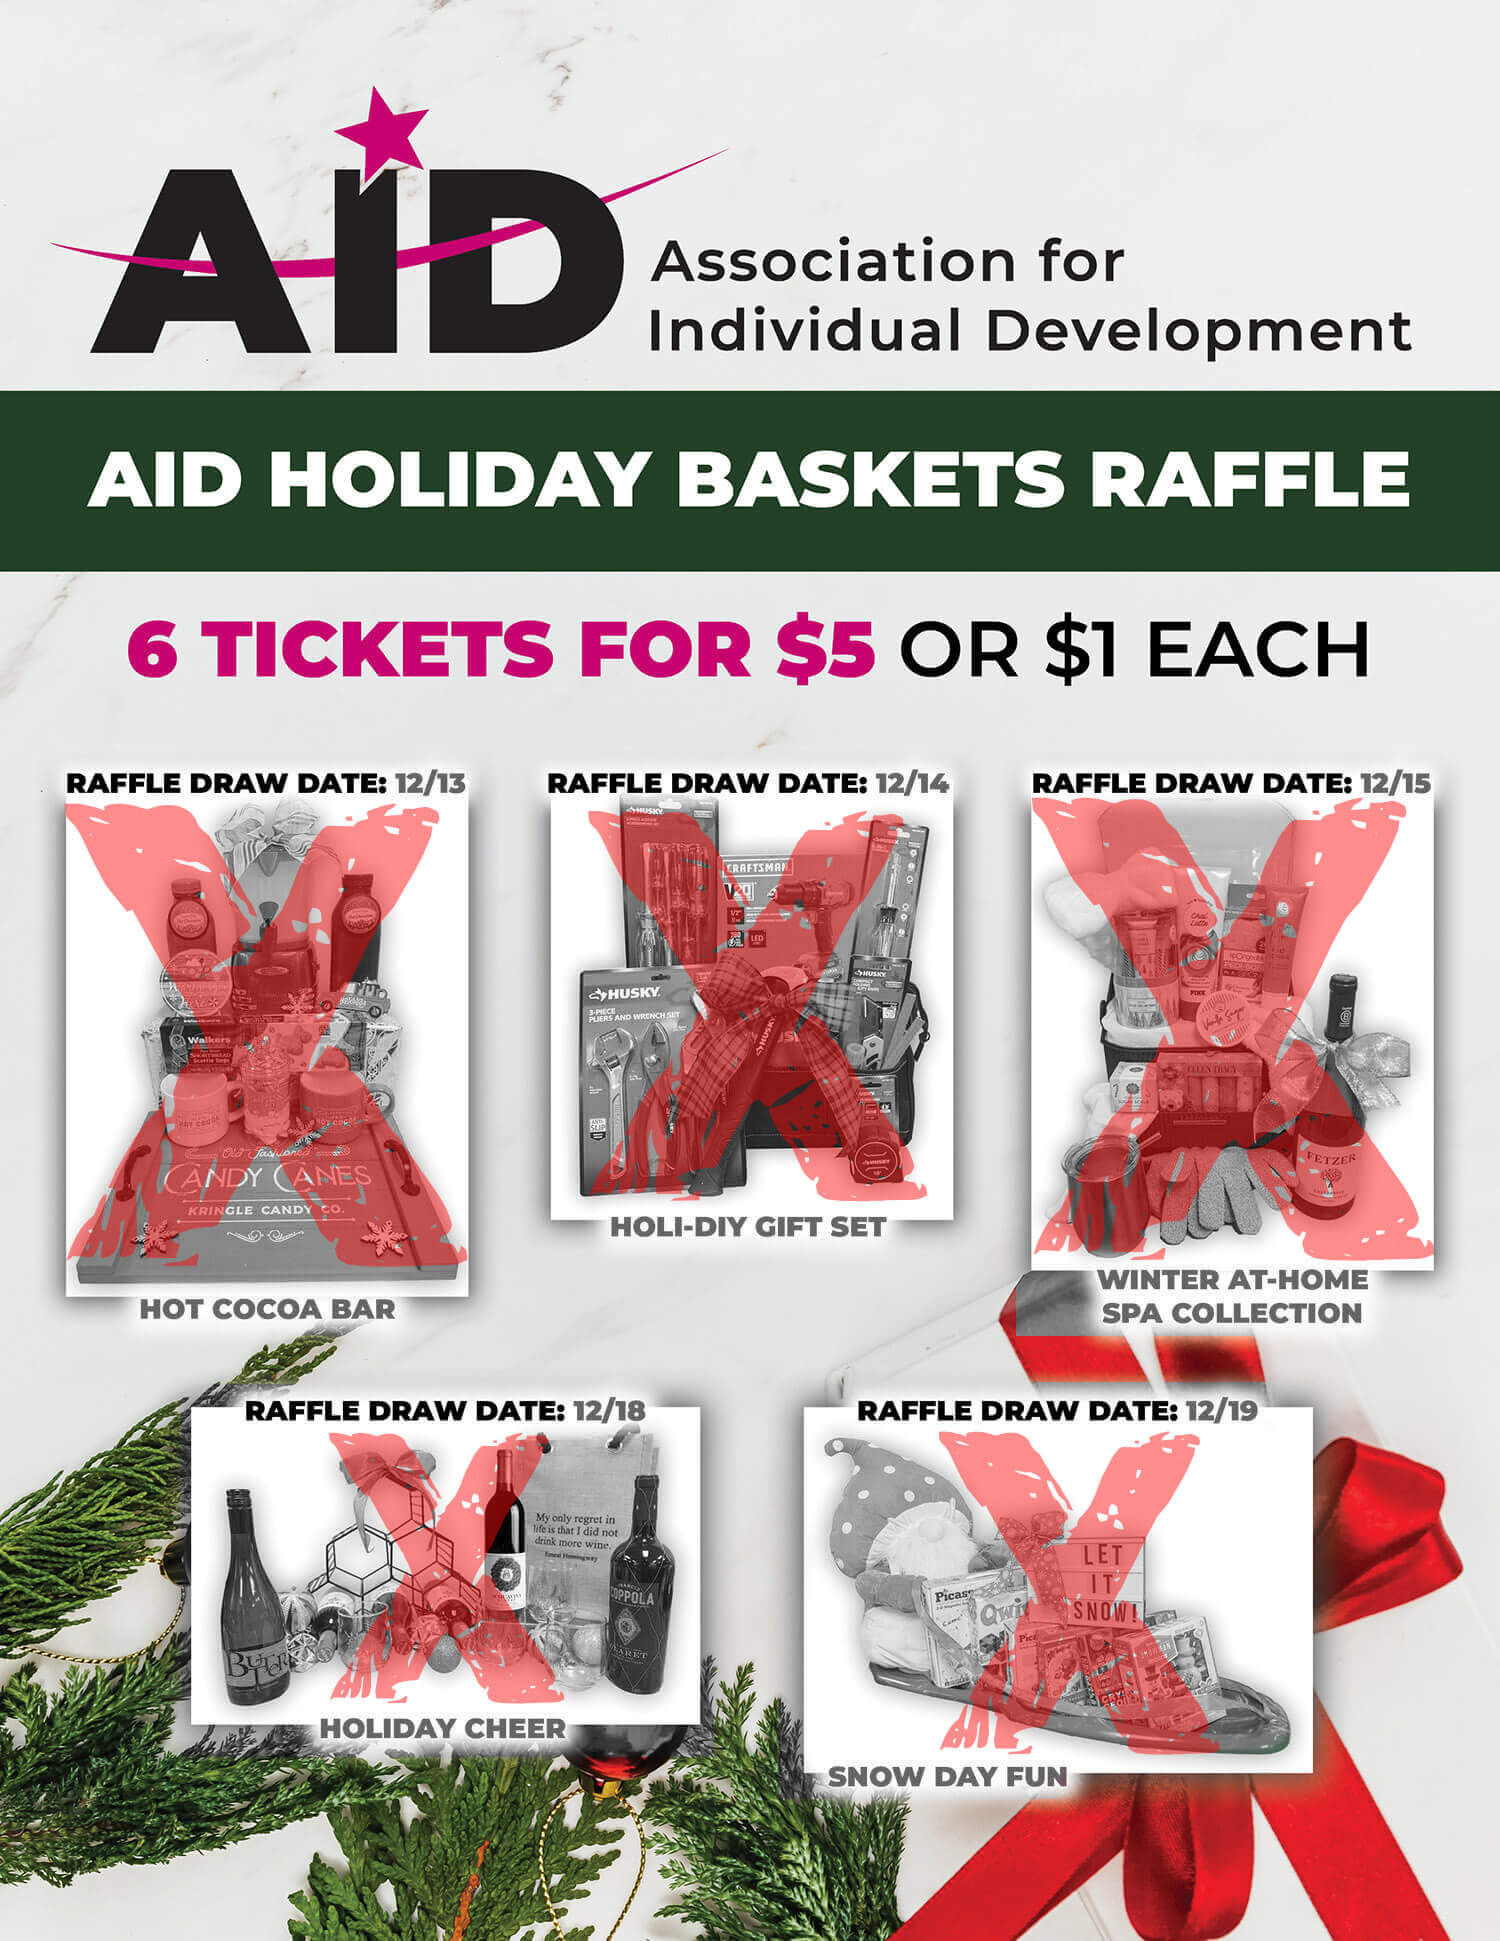 AID Holiday Baskets Raffle: 6 Tickets for $5 or $1 Each